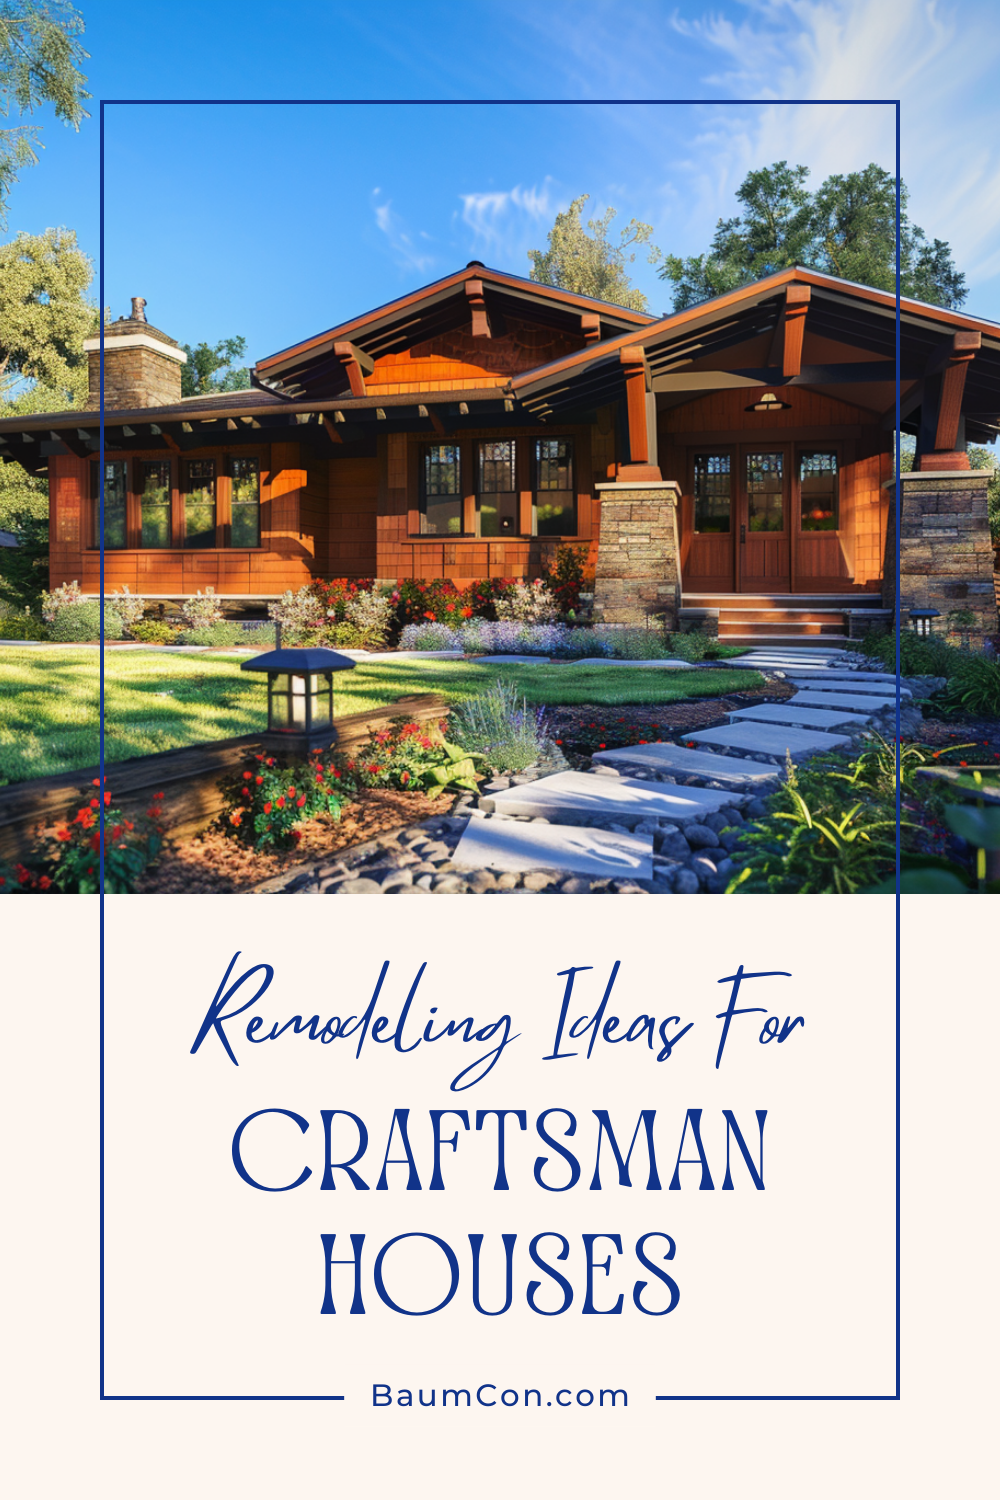 Promotional image of a craftsman-style house with a landscaped garden, featuring the caption "remodeling ideas for craftsman houses" from baumcon.com.